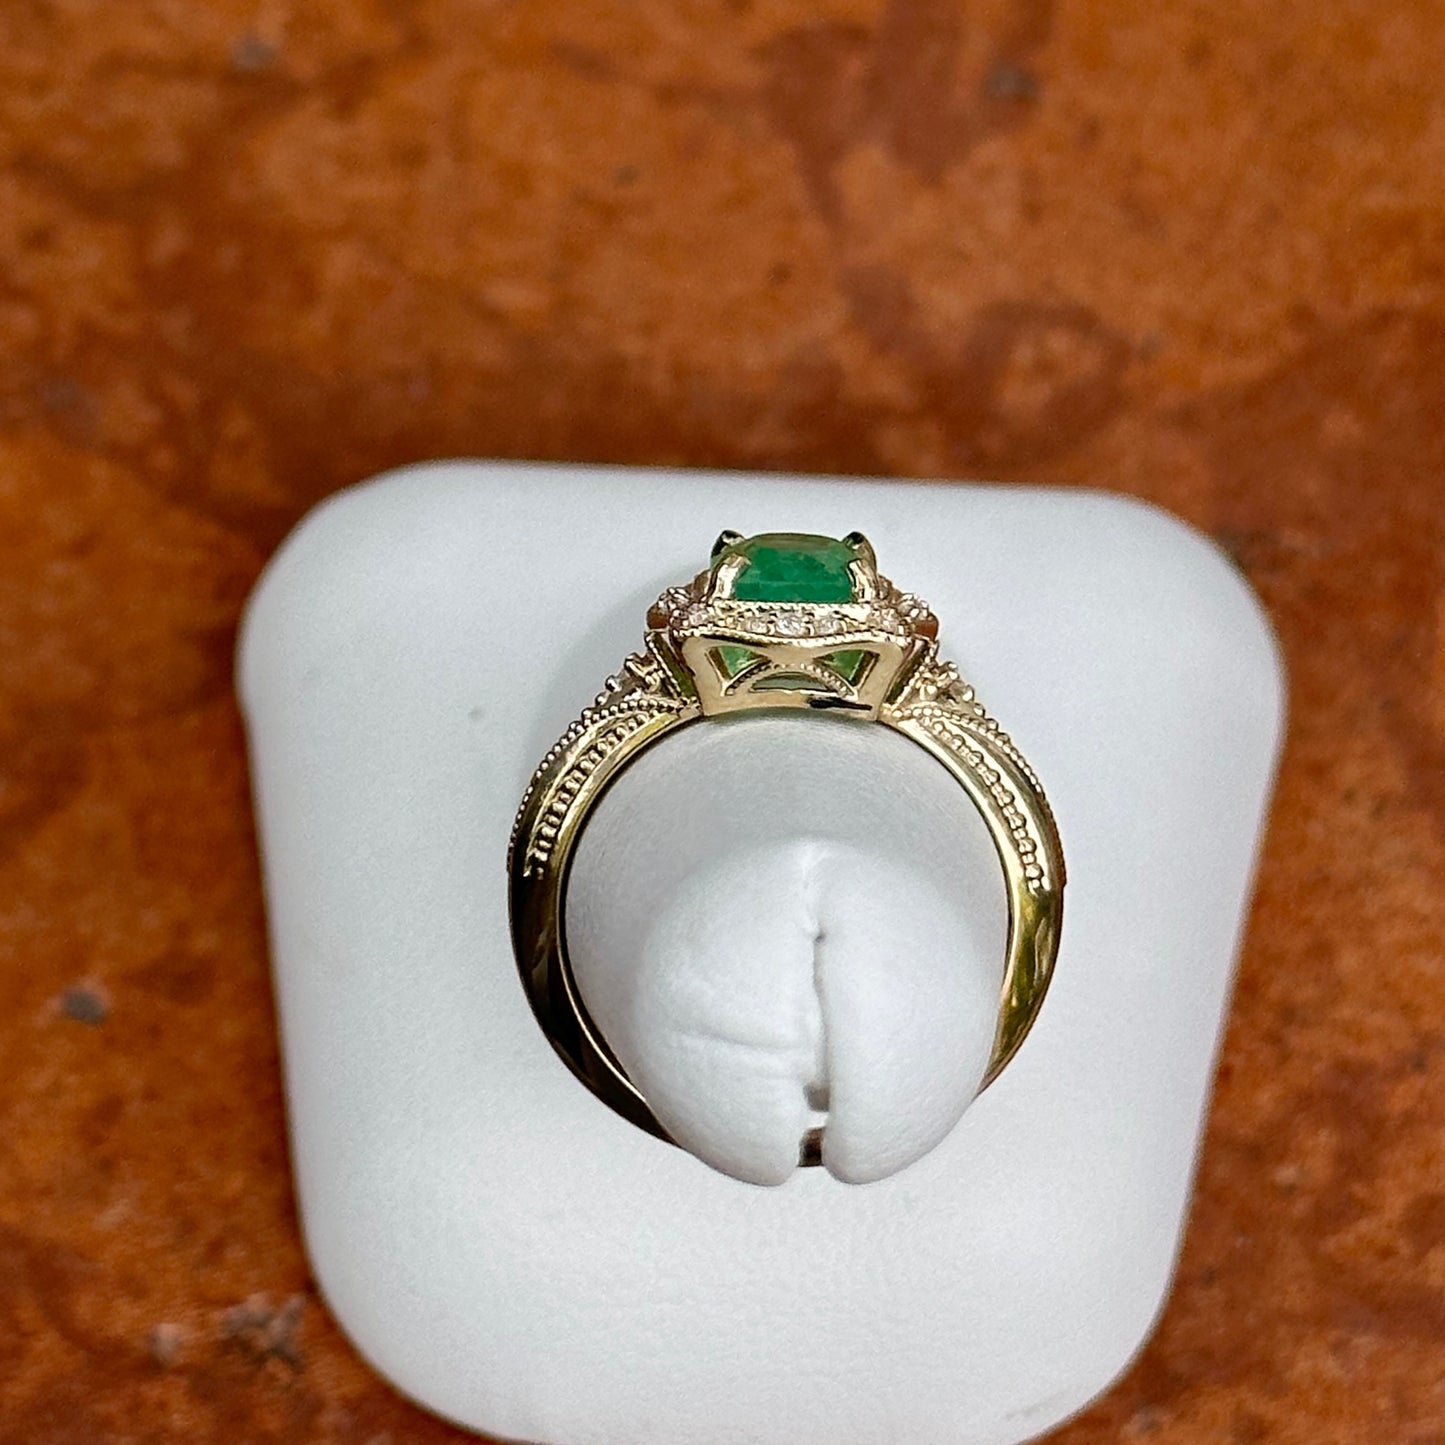 14KT Yellow Gold Oval 1.41 CT Colombian Emerald + Diamond Halo Ring